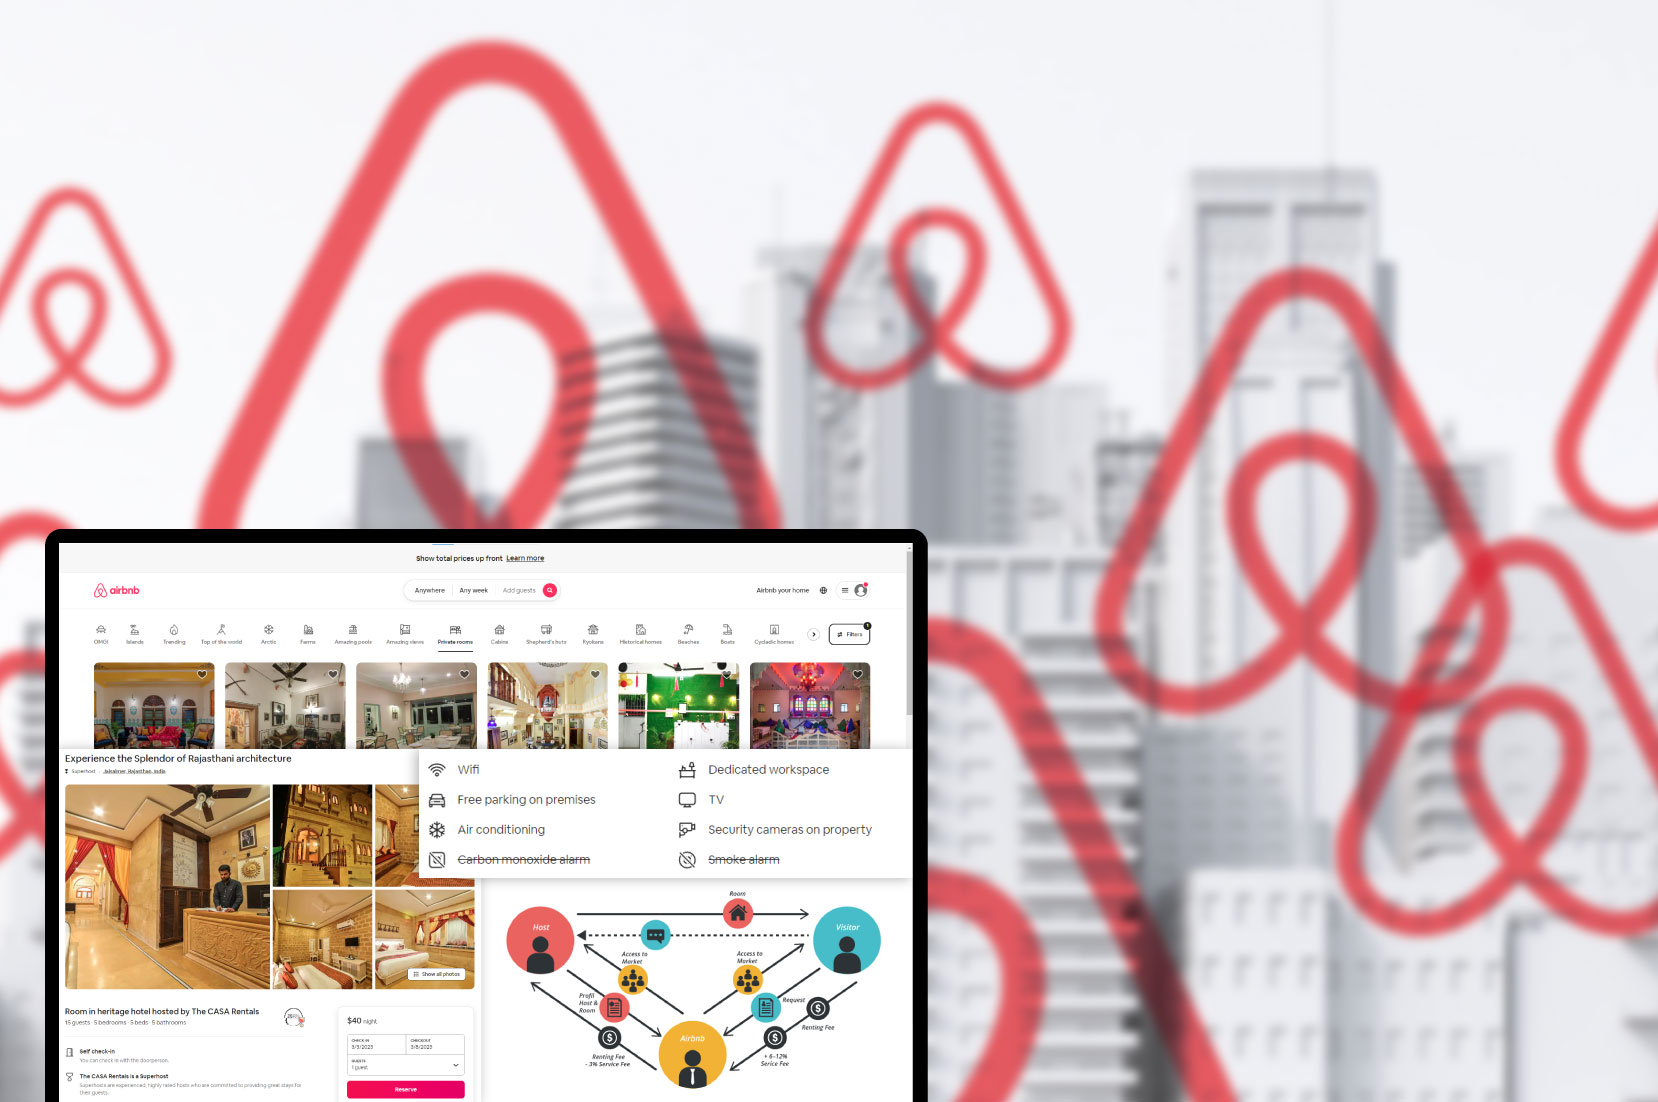 Market-Research-using-Airbnb-Datasets